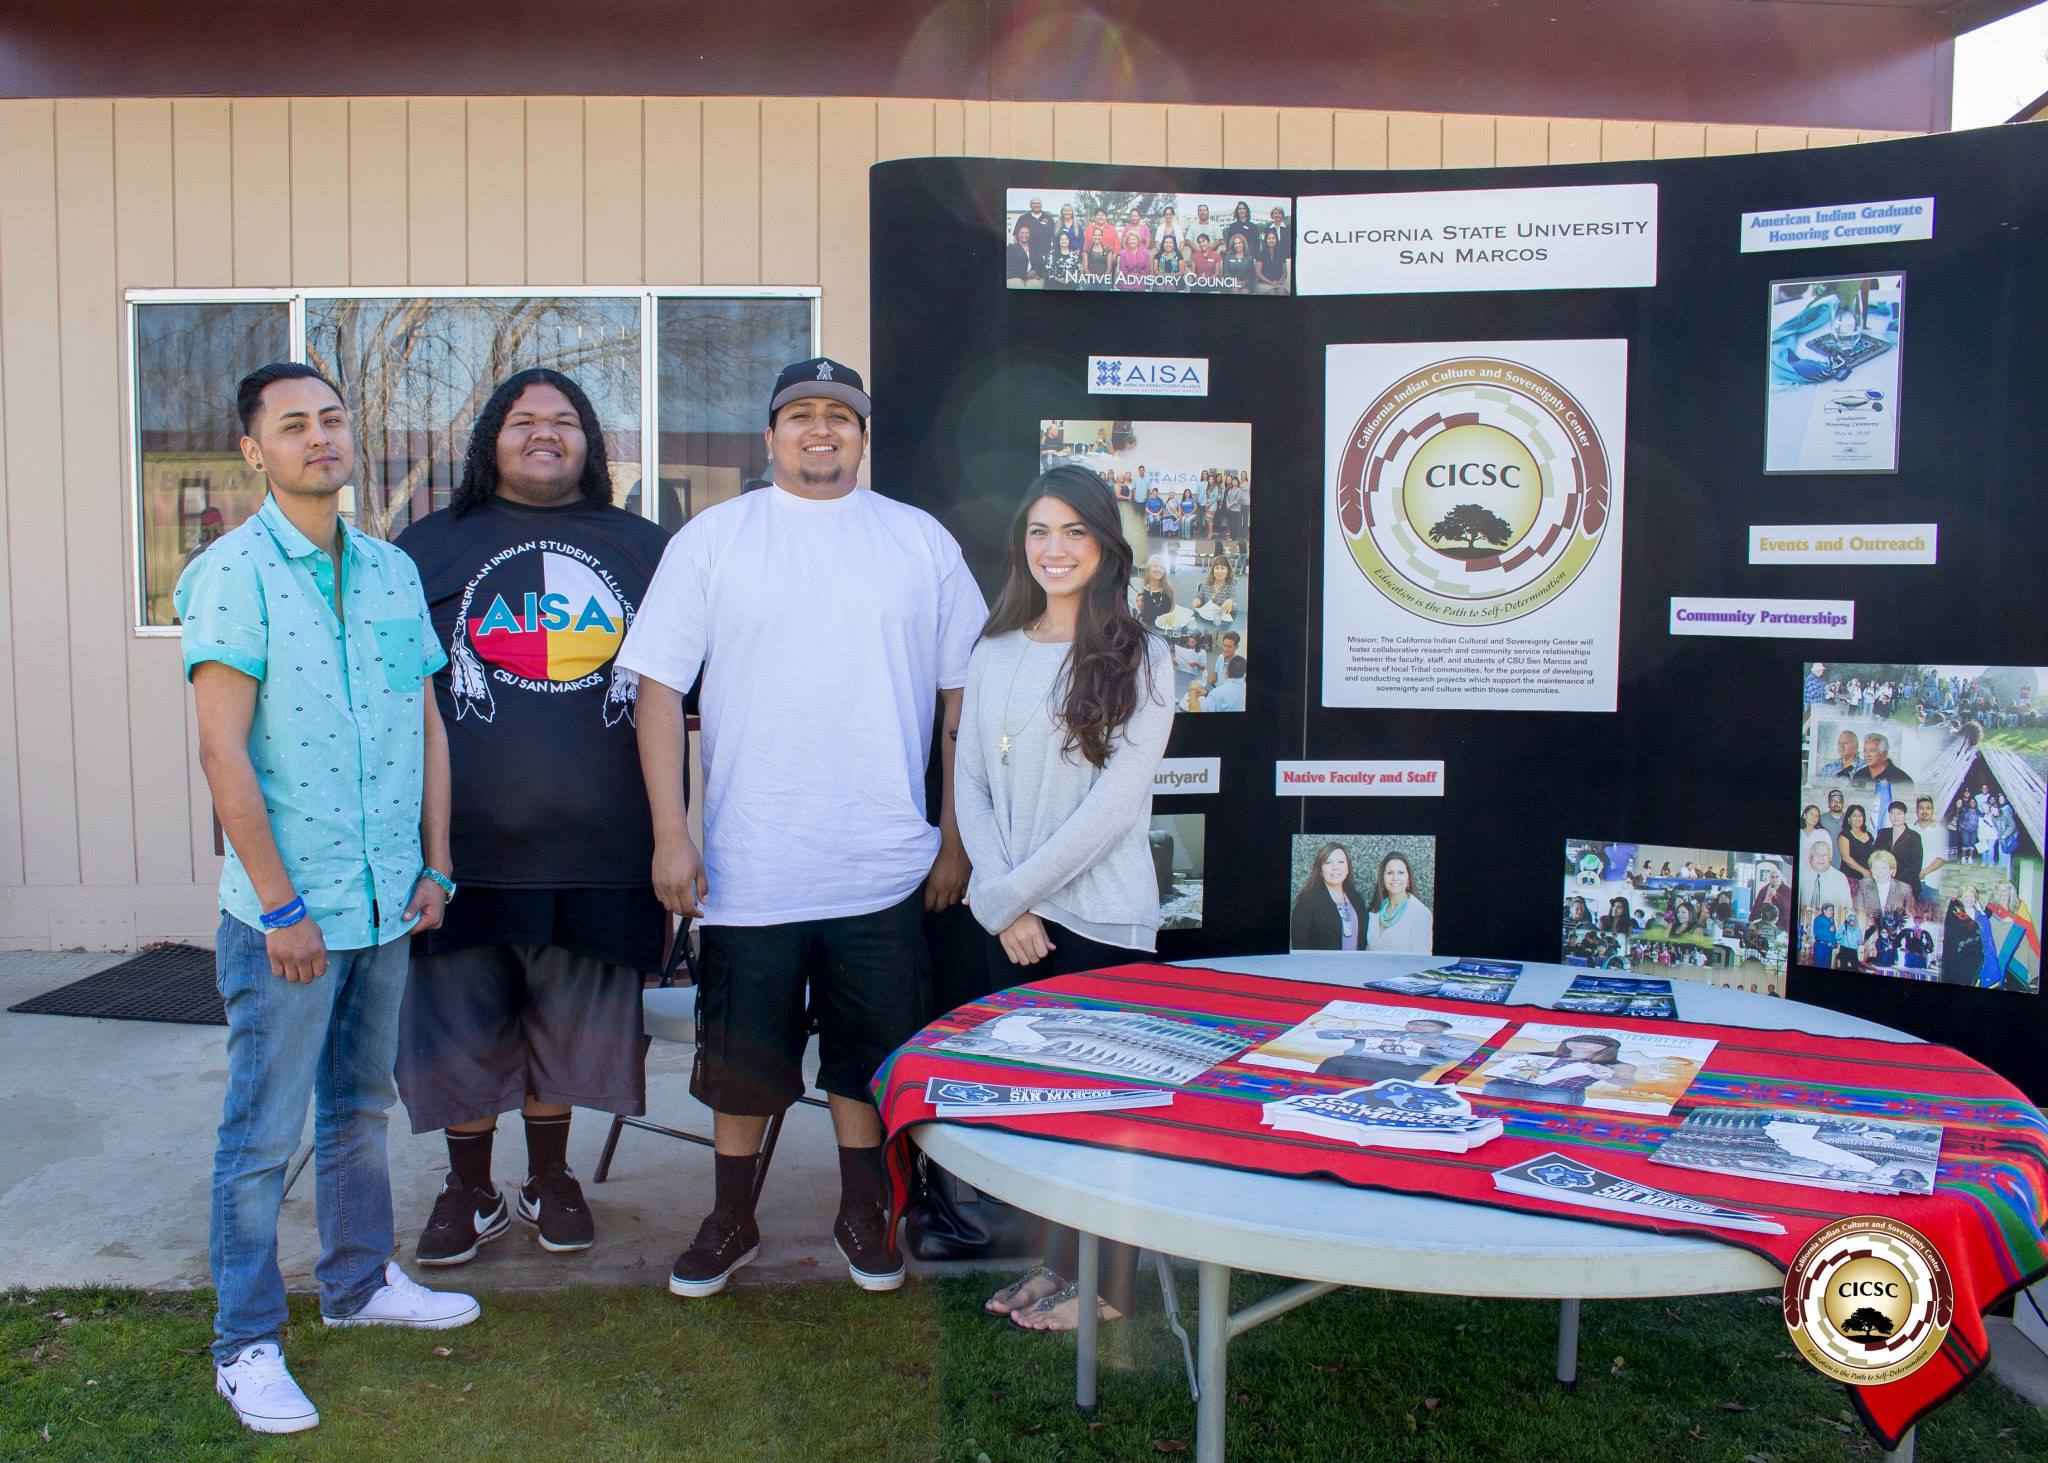 Four students from the CICSC and AISA standing outside in front of a table and poster board displaying information about the CICSC, AISA, and Native American community and events at CSUSM